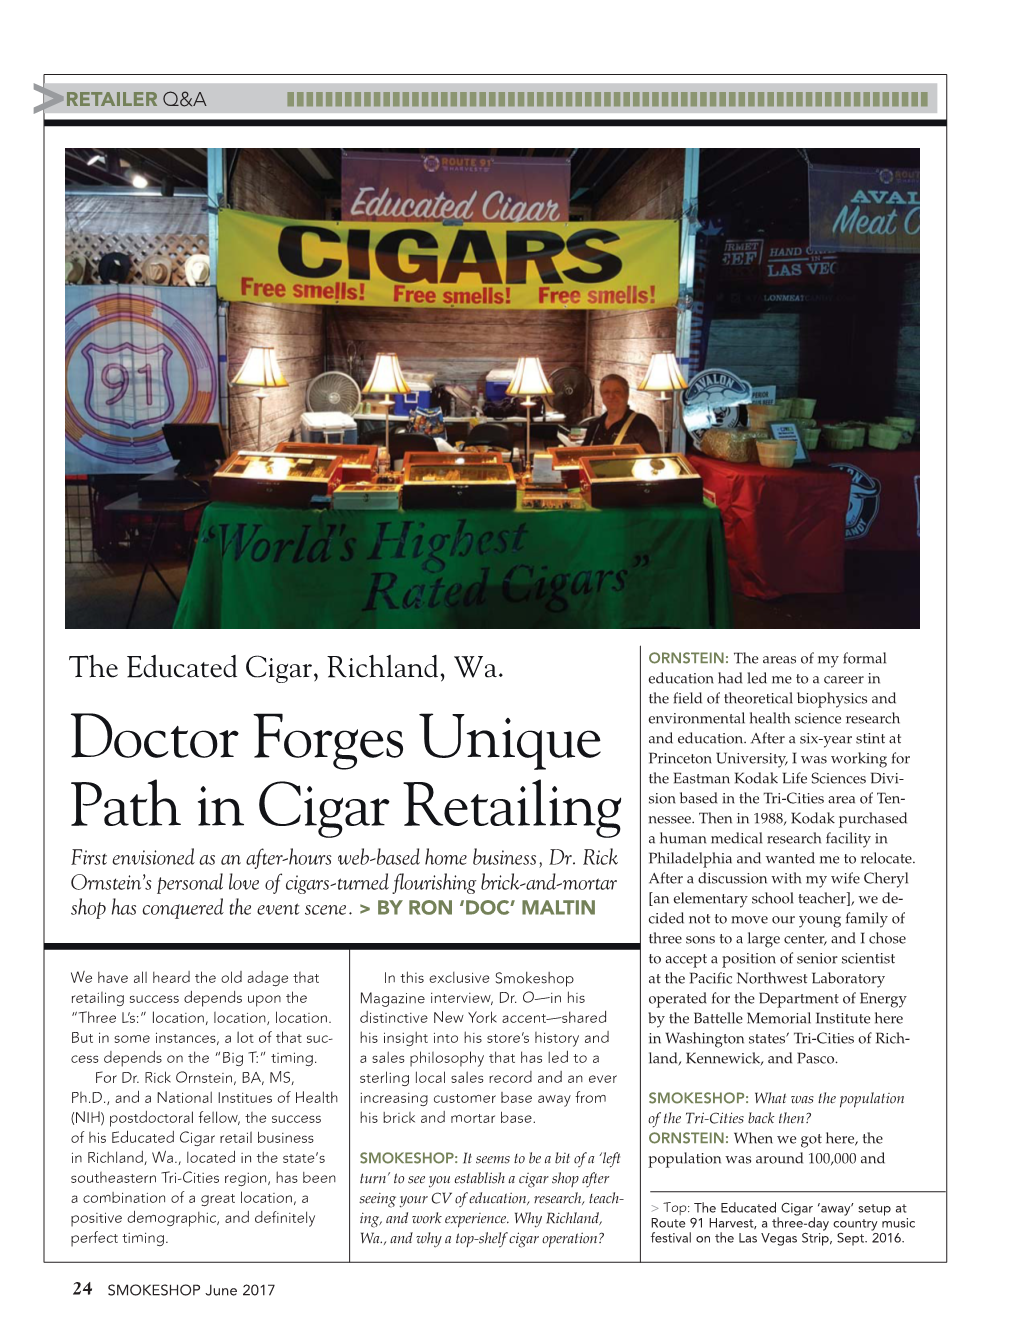 Doctor Forges Unique Path in Cigar Retailing